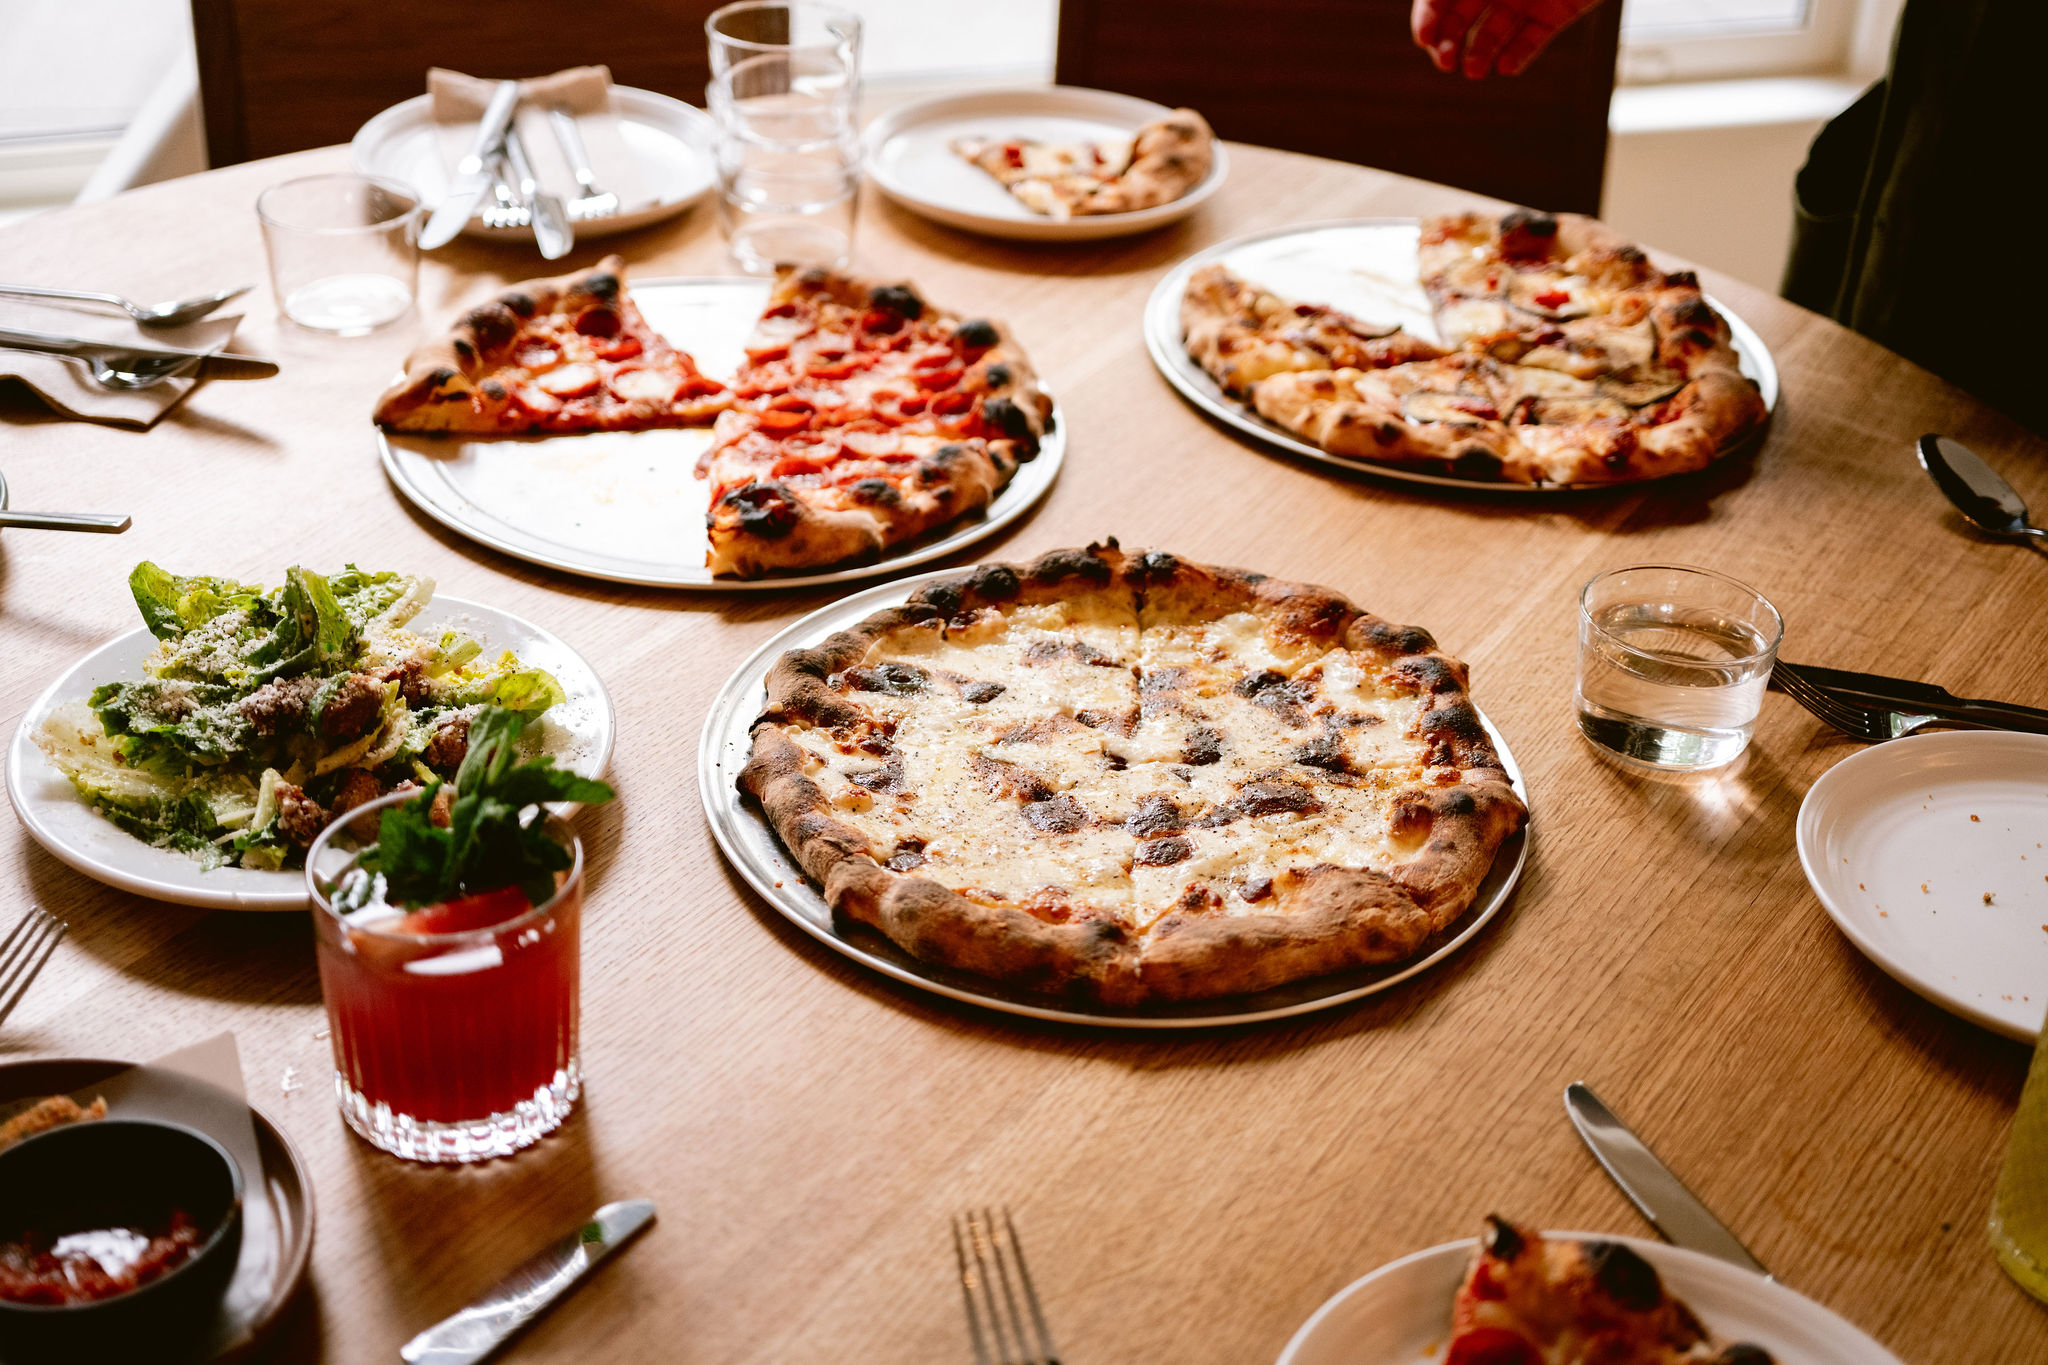 Pizzas and salads on a table